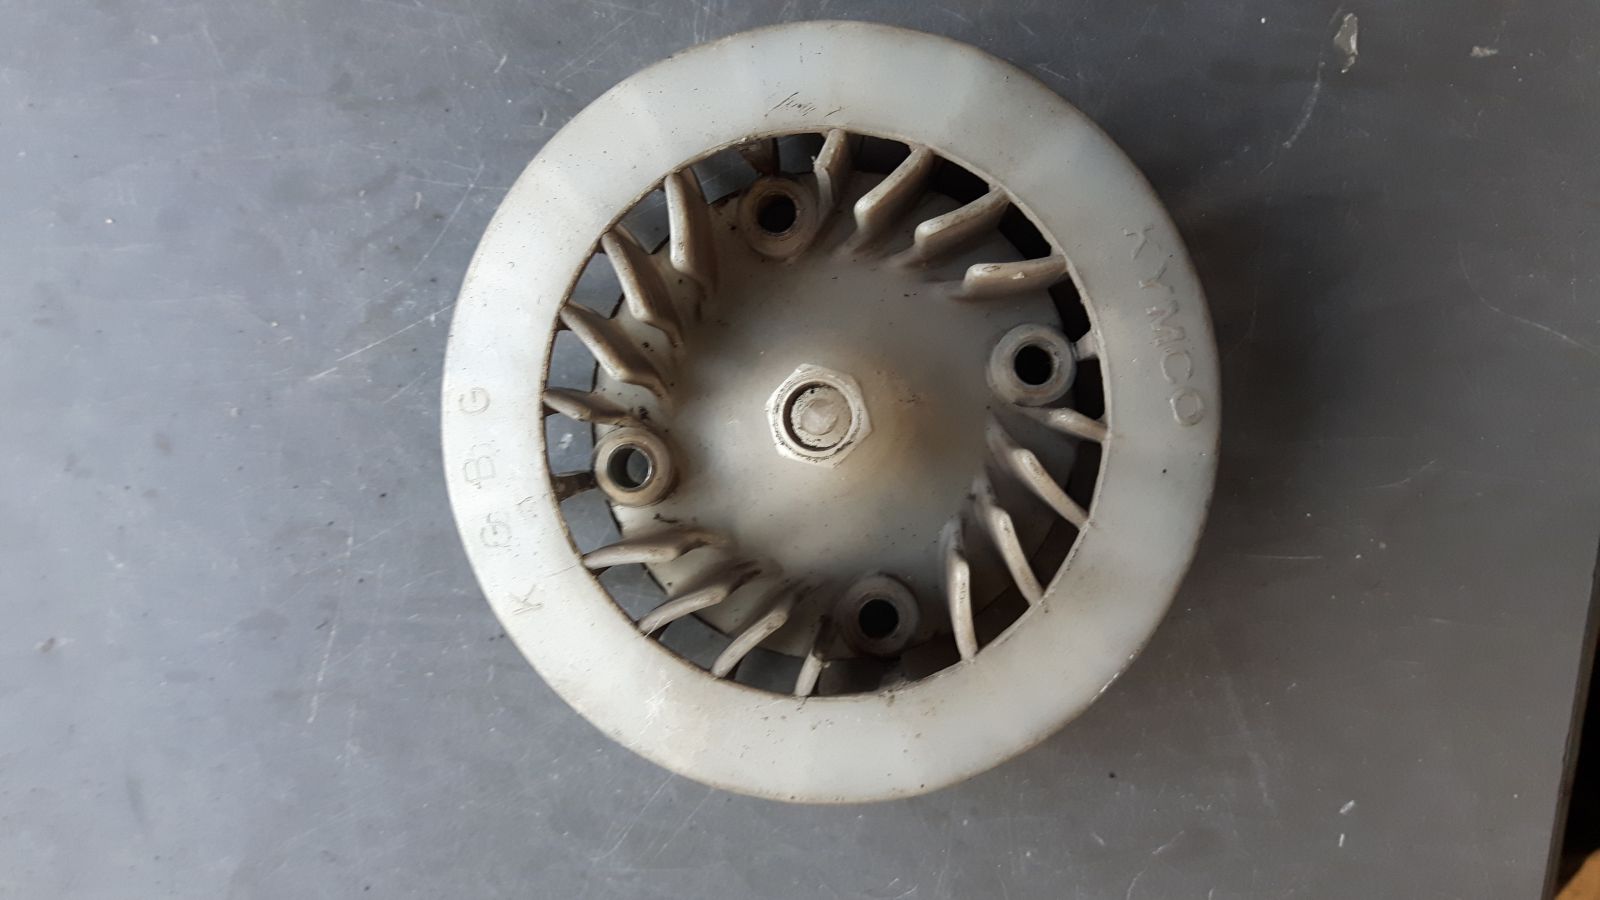 GY6 china kymco scooter impeller fan